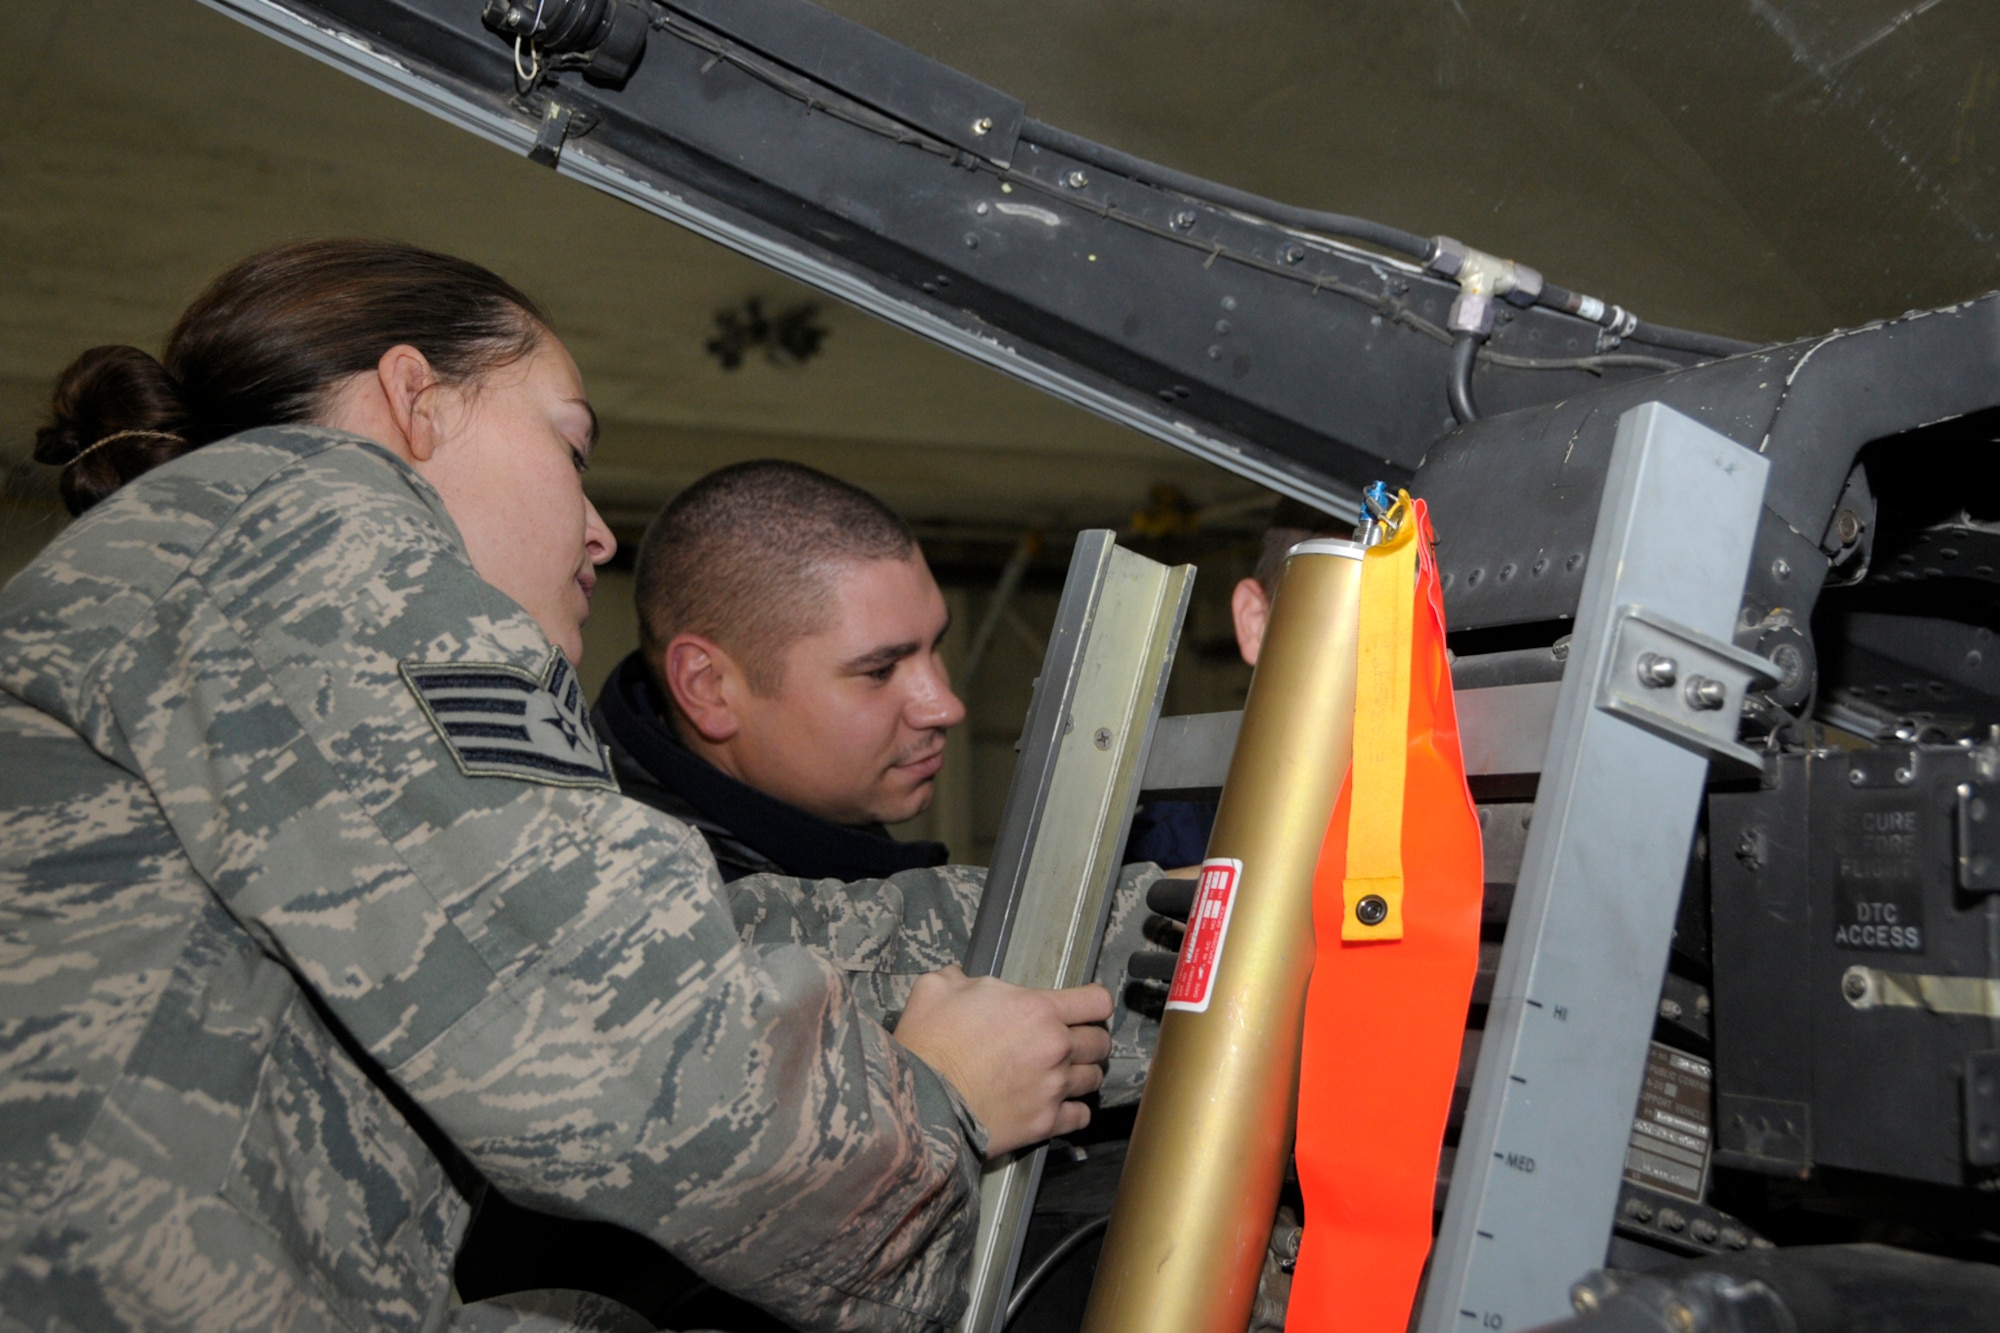 131030-Z-VF226-038 -- Staff Sgt. Nicole Moss, 127th Maintenance Squadron, and Petty Officer 2nd Class Mike Barber, Coast Guard Air Station Detroit, review some of the systems on an A-10 Thunderbolt II at Selfridge Air National Guard Base, Mich., Oct. 30, 2013. The 127th MXS maintains A-10 Thunderbolt II attack fighters and Air Station Detroit operates MH-65 Dolphin rescue helicopters at Selfridge. The Coast Guard personnel at Air Station Detroit do not normally have the opportunity to work on pressurization systems and contacted the 127th MXS for joint training. (Air National Guard photo by Brittani Baisden / Released)